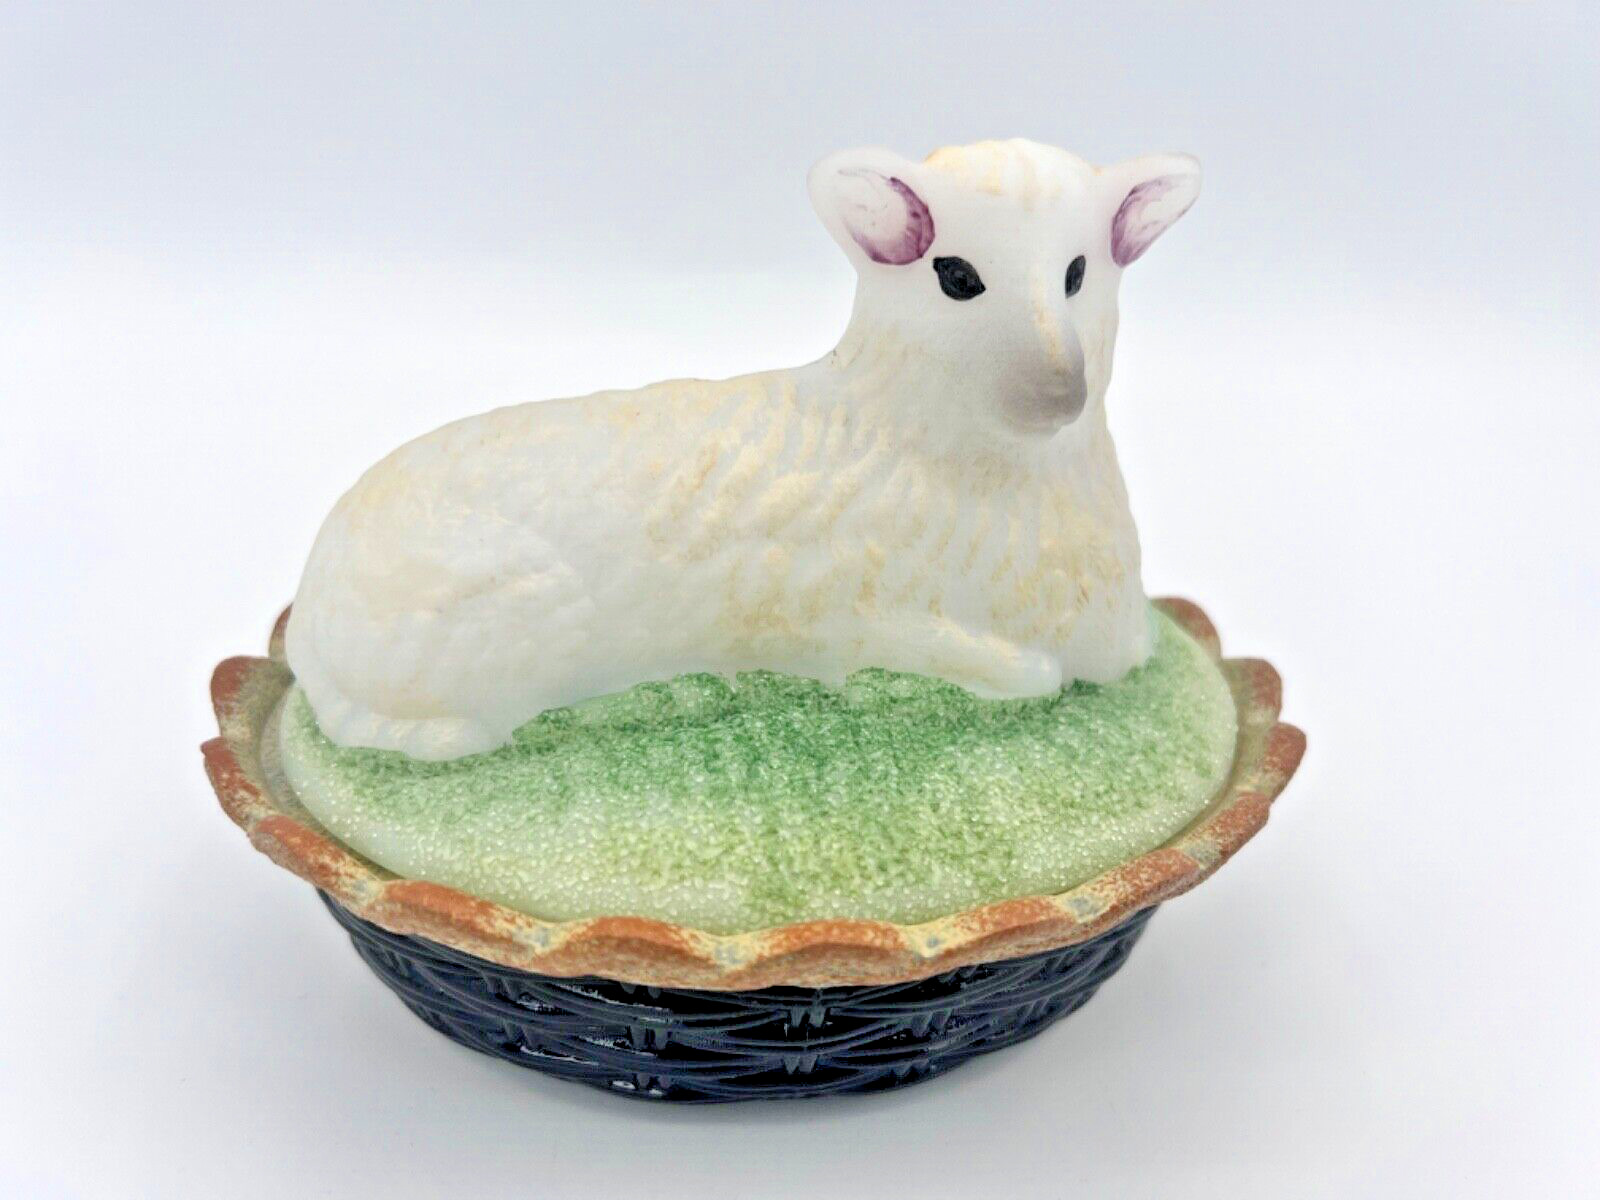 Vtg Fenton Glass Lamb Sheep on Covered Candy Dish Woven Basket - T. Mendenhall